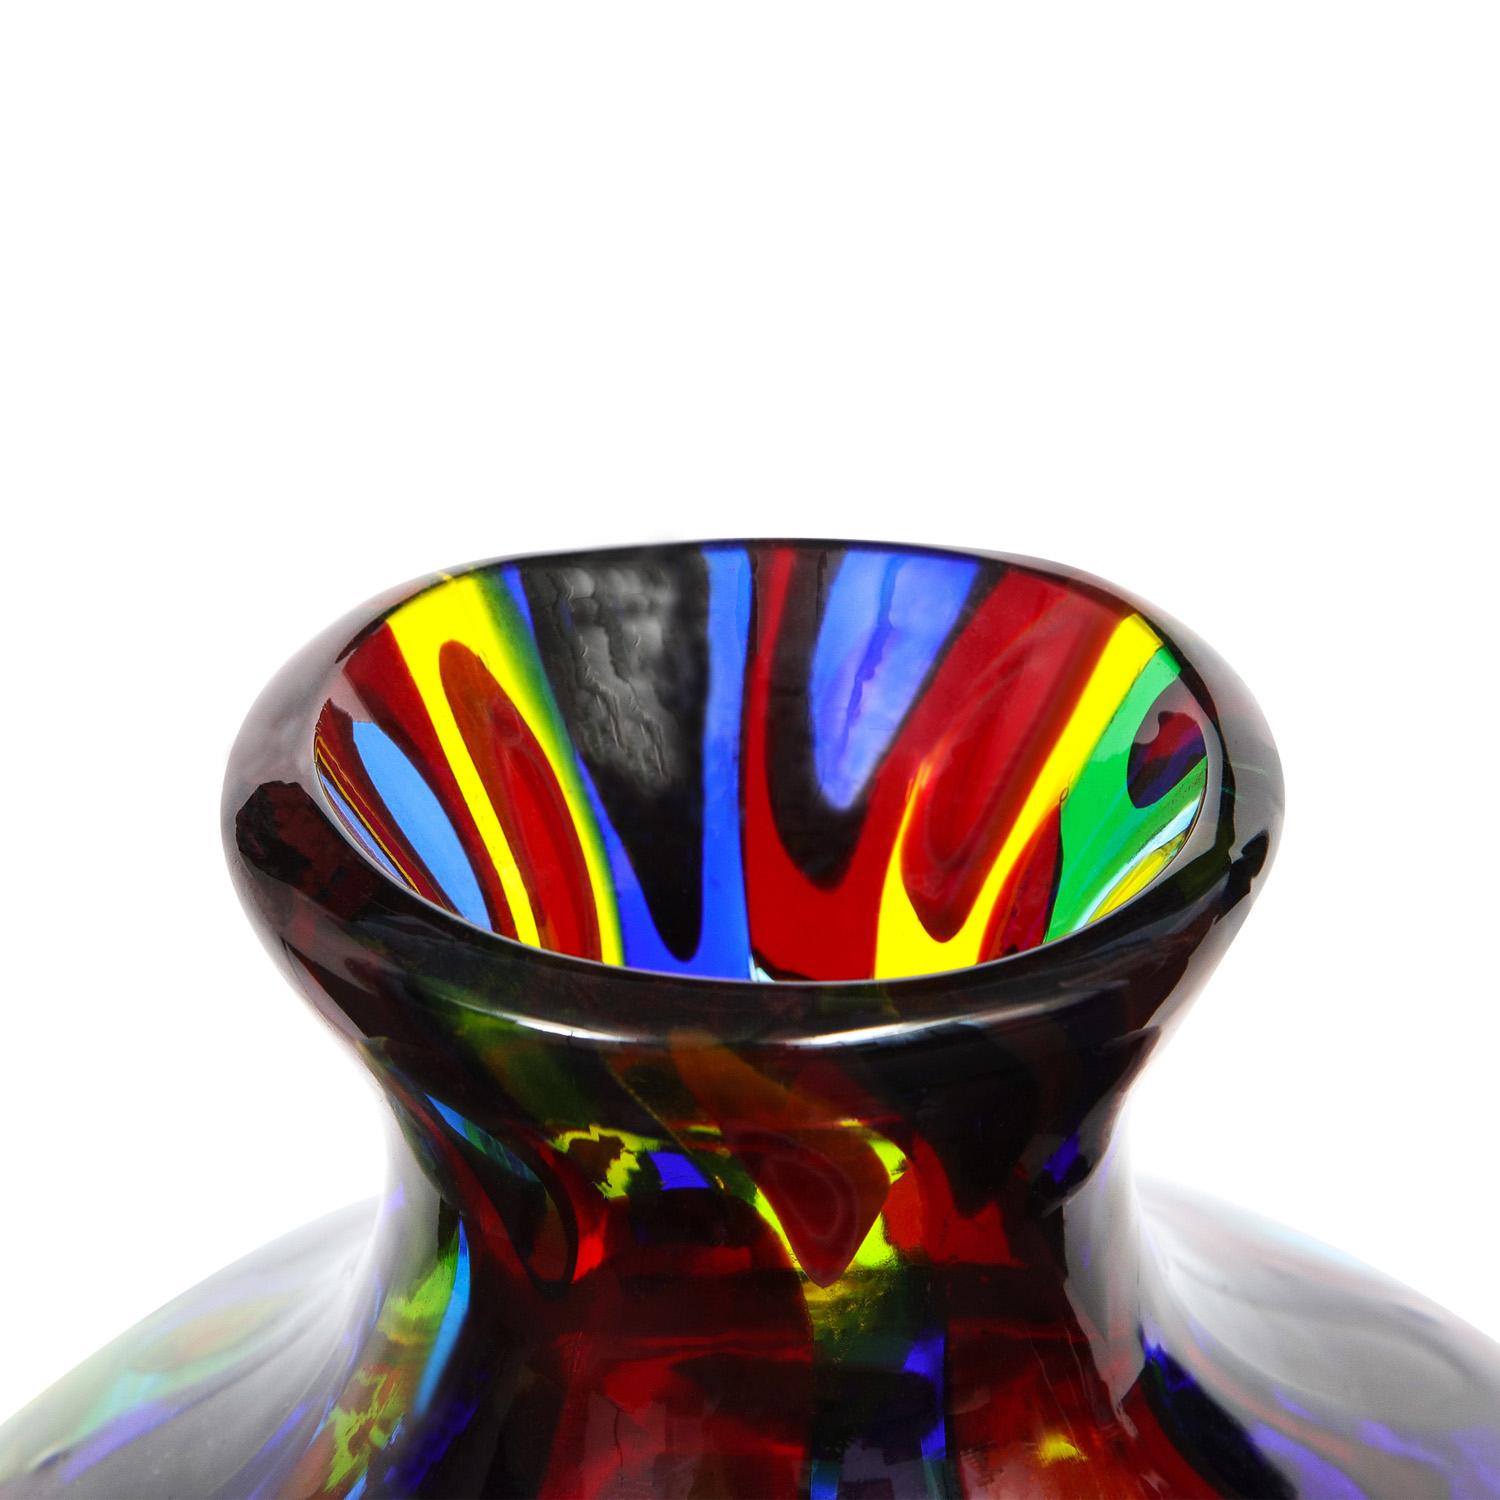 Mid-Century Modern Glass Vase with Large Murrhines by Anzolo Fuga for A.V.E.M, 1956 For Sale